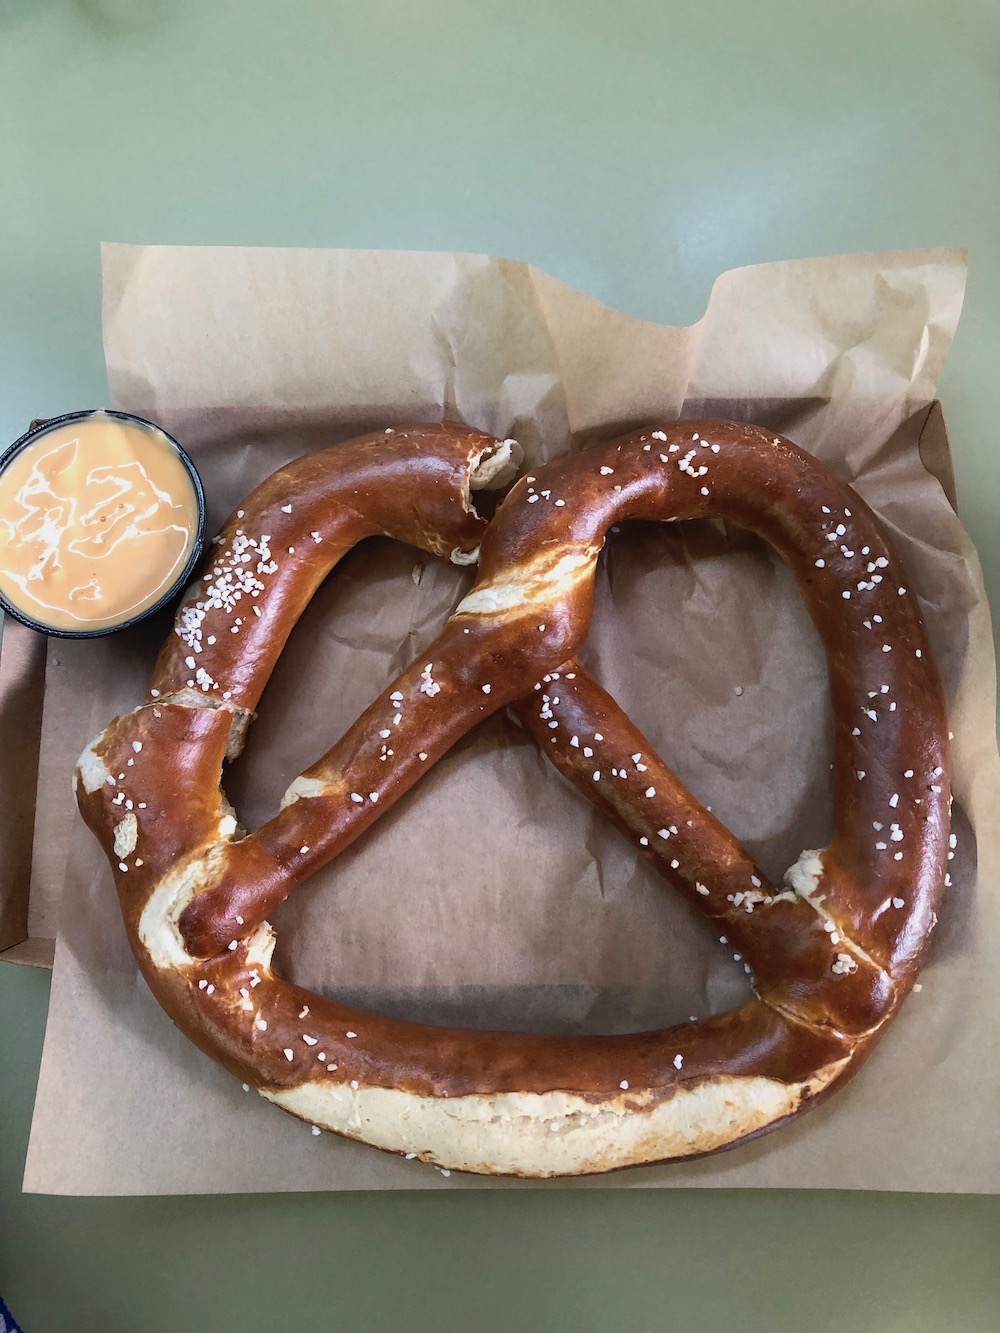 Colossal Pretzel with beer cheese from Pongu Pongu in Disney's Pandora.